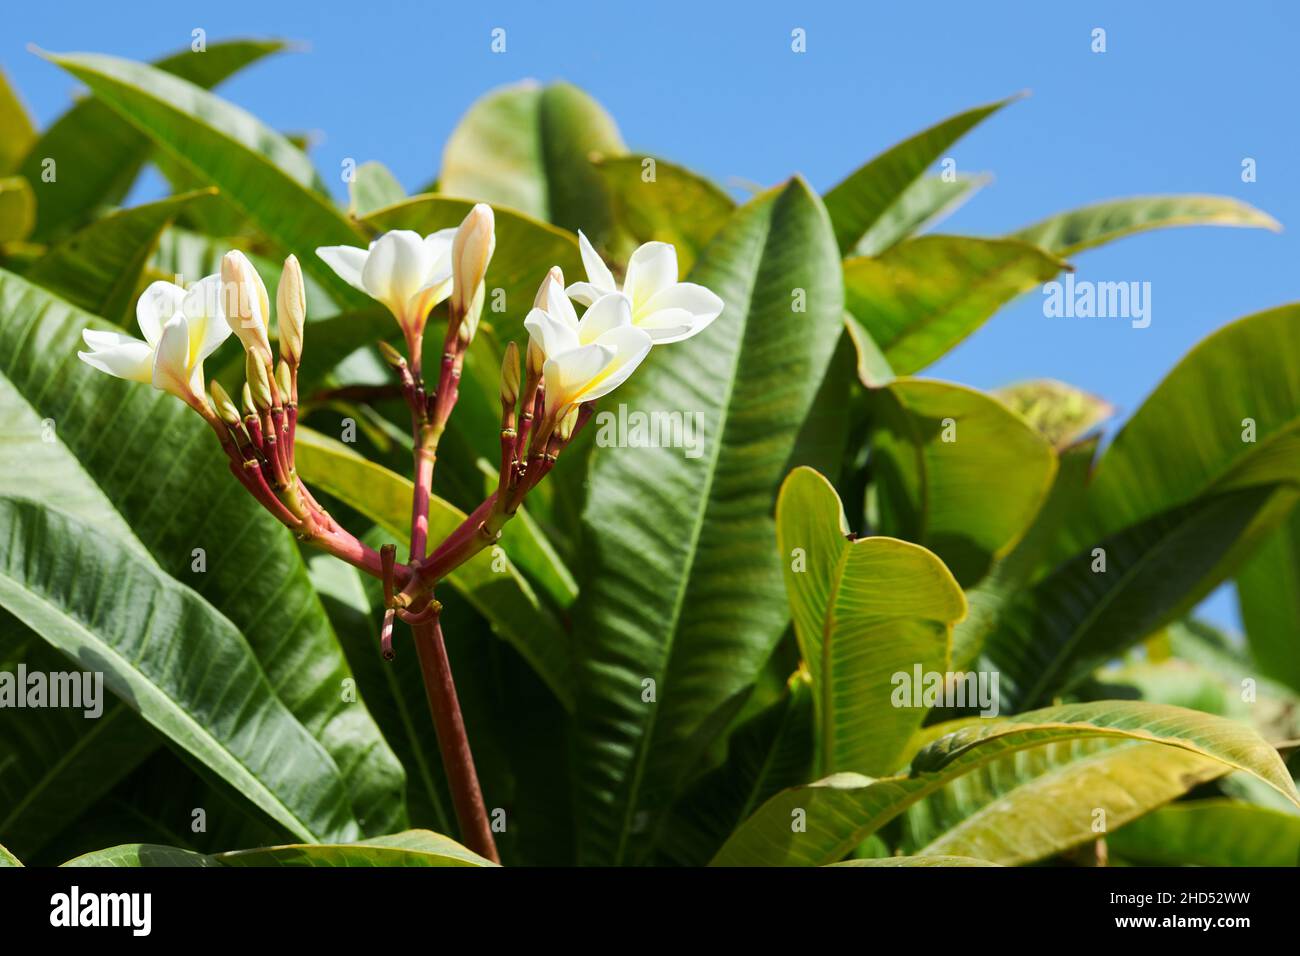 Frangipani (Plumeria) flowers with green leaves on a blue sky background in the tropical garden. Stock Photo